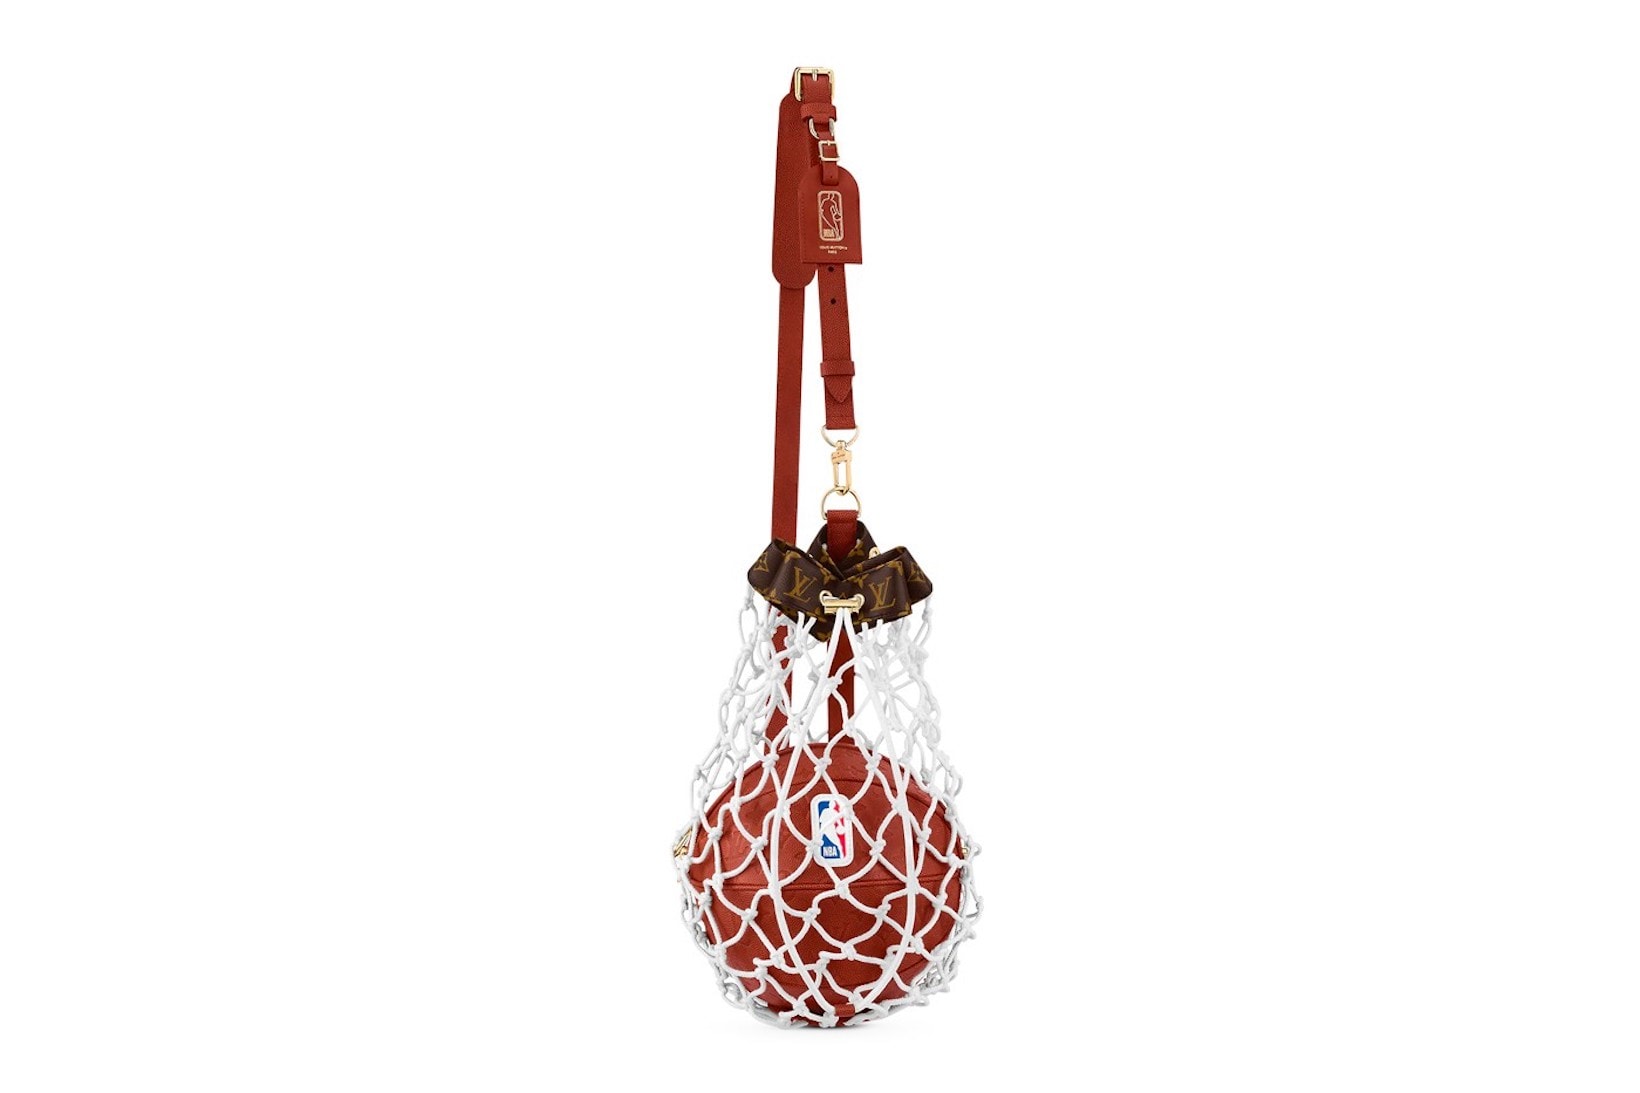 NBA Louis Vuitton Ball in Basket Bag Accessory Brown Leather